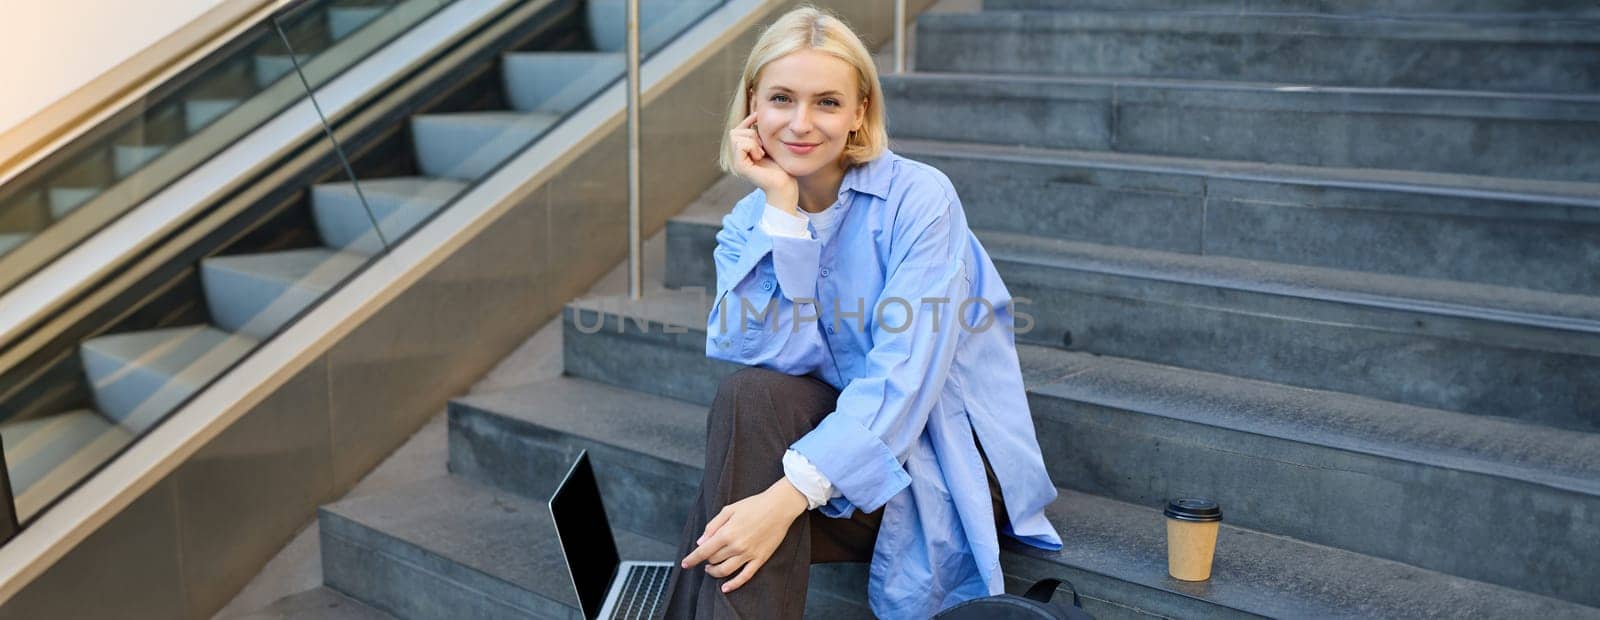 Portrait of young urban woman, college student with backpack, laptop and coffee, sitting on stairs in city, resting outdoors, taking break.